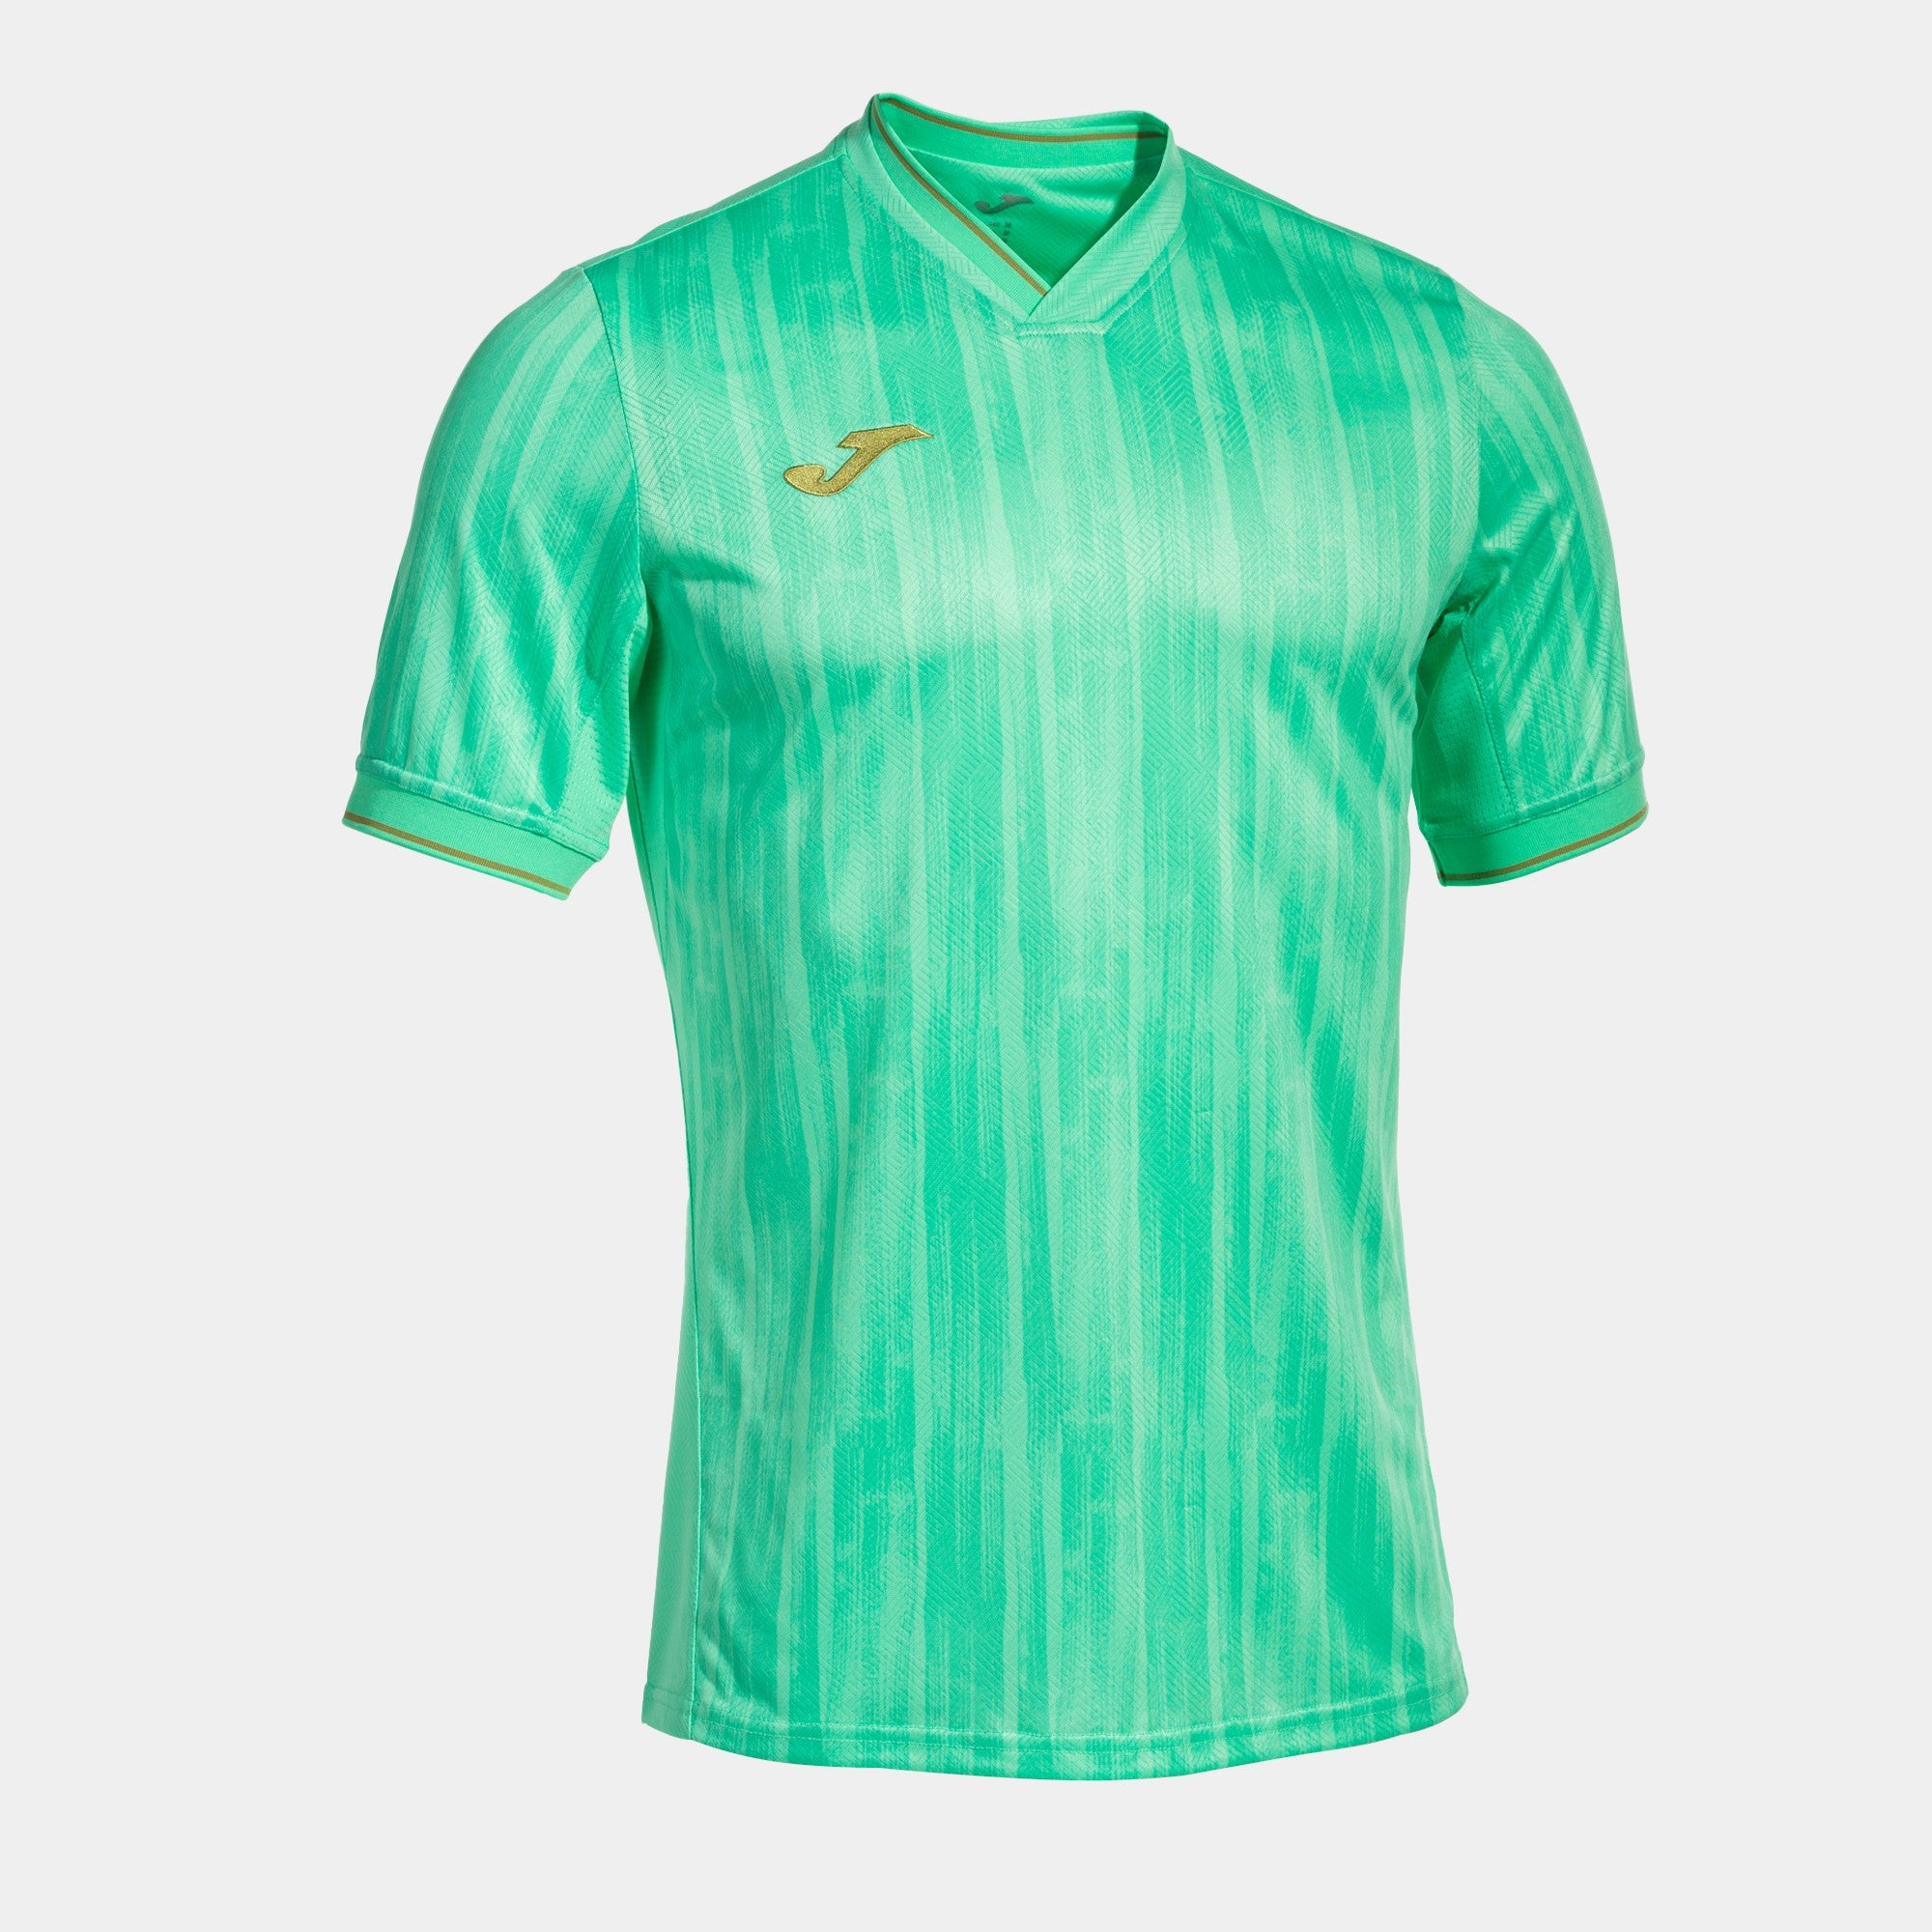 Joma Gold VI Short Sleeved T-Shirt -Electric Green/Gold